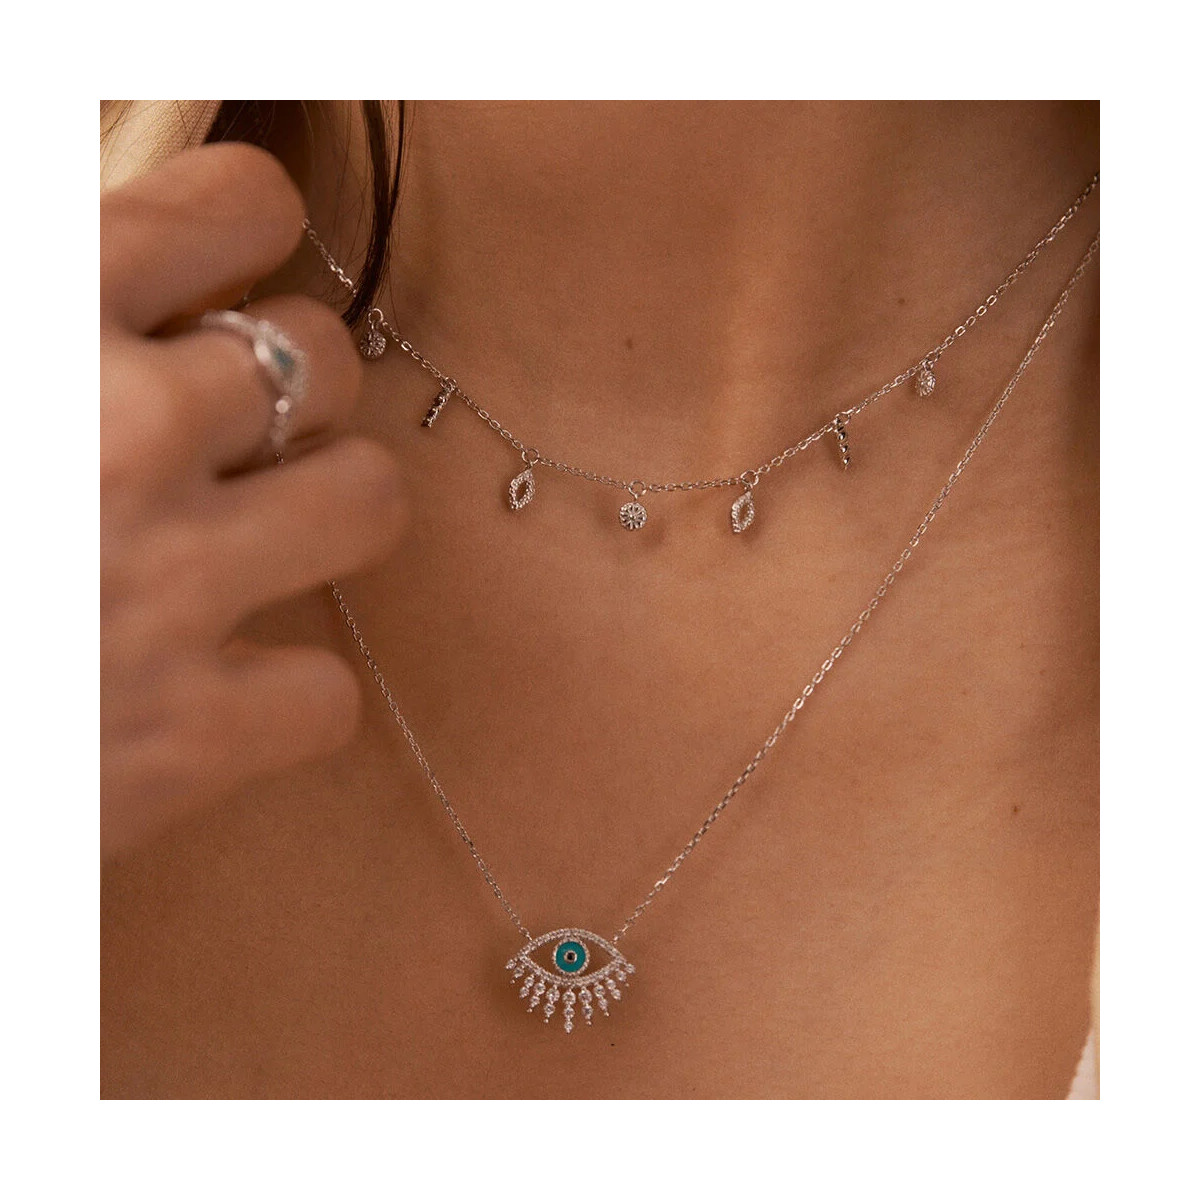 LUCKY EYE MIDI NECKLACE - TURQUOISE / SILVER